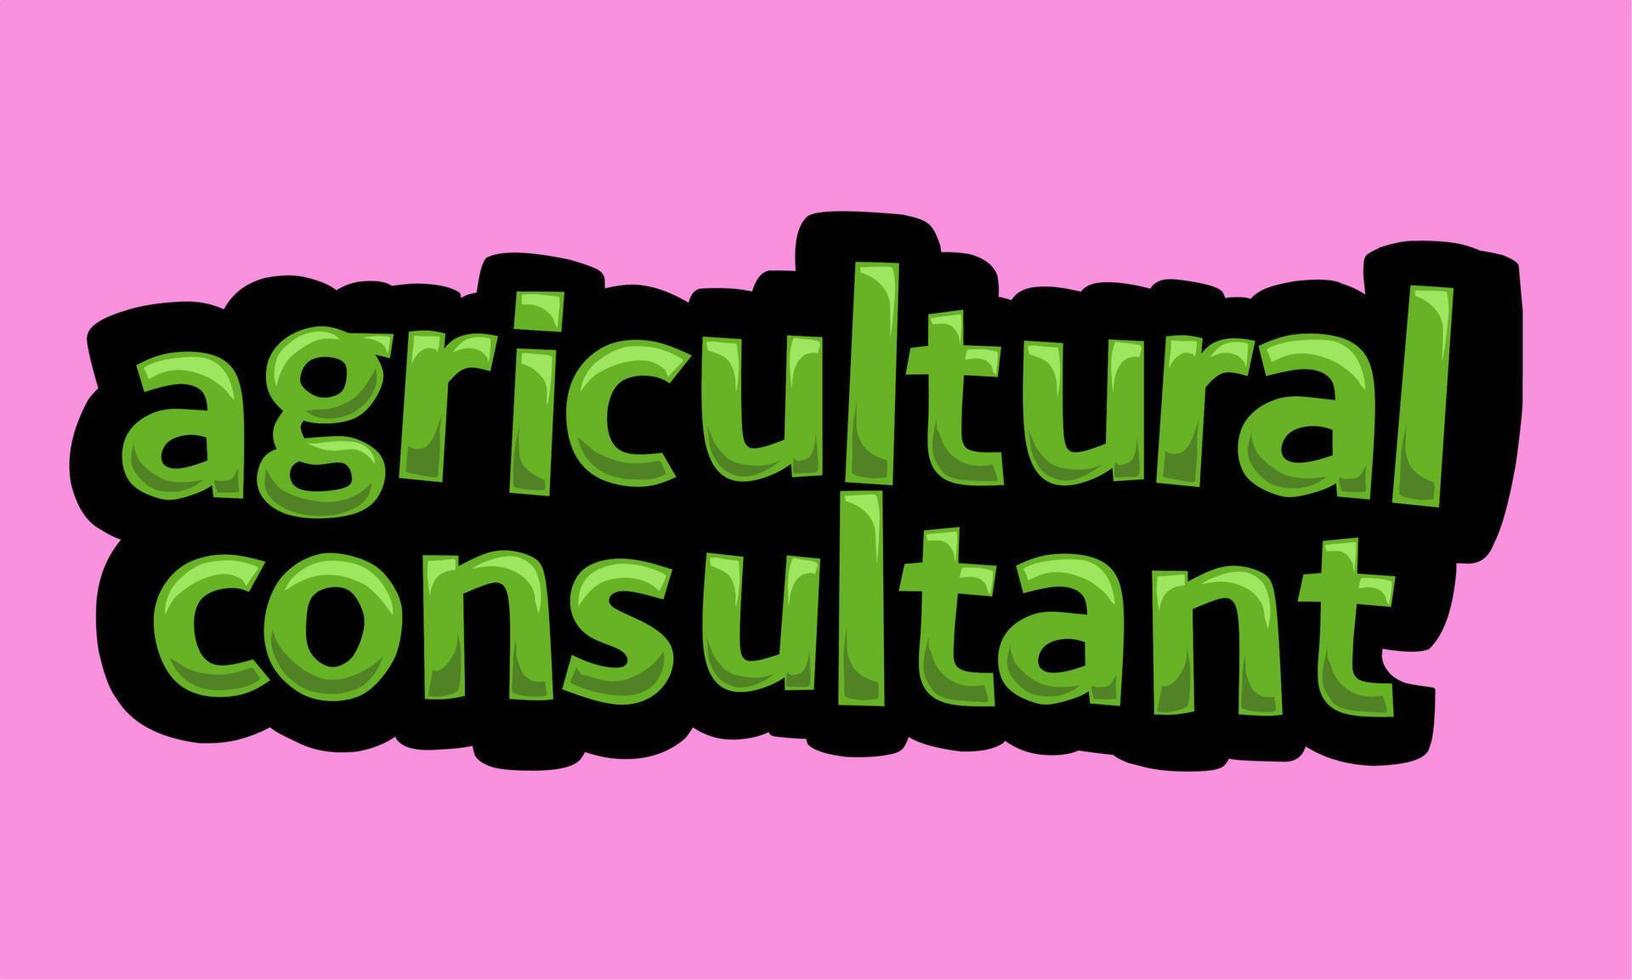 AGRICULTURAL CONSULTANT writing vector design on a pink background